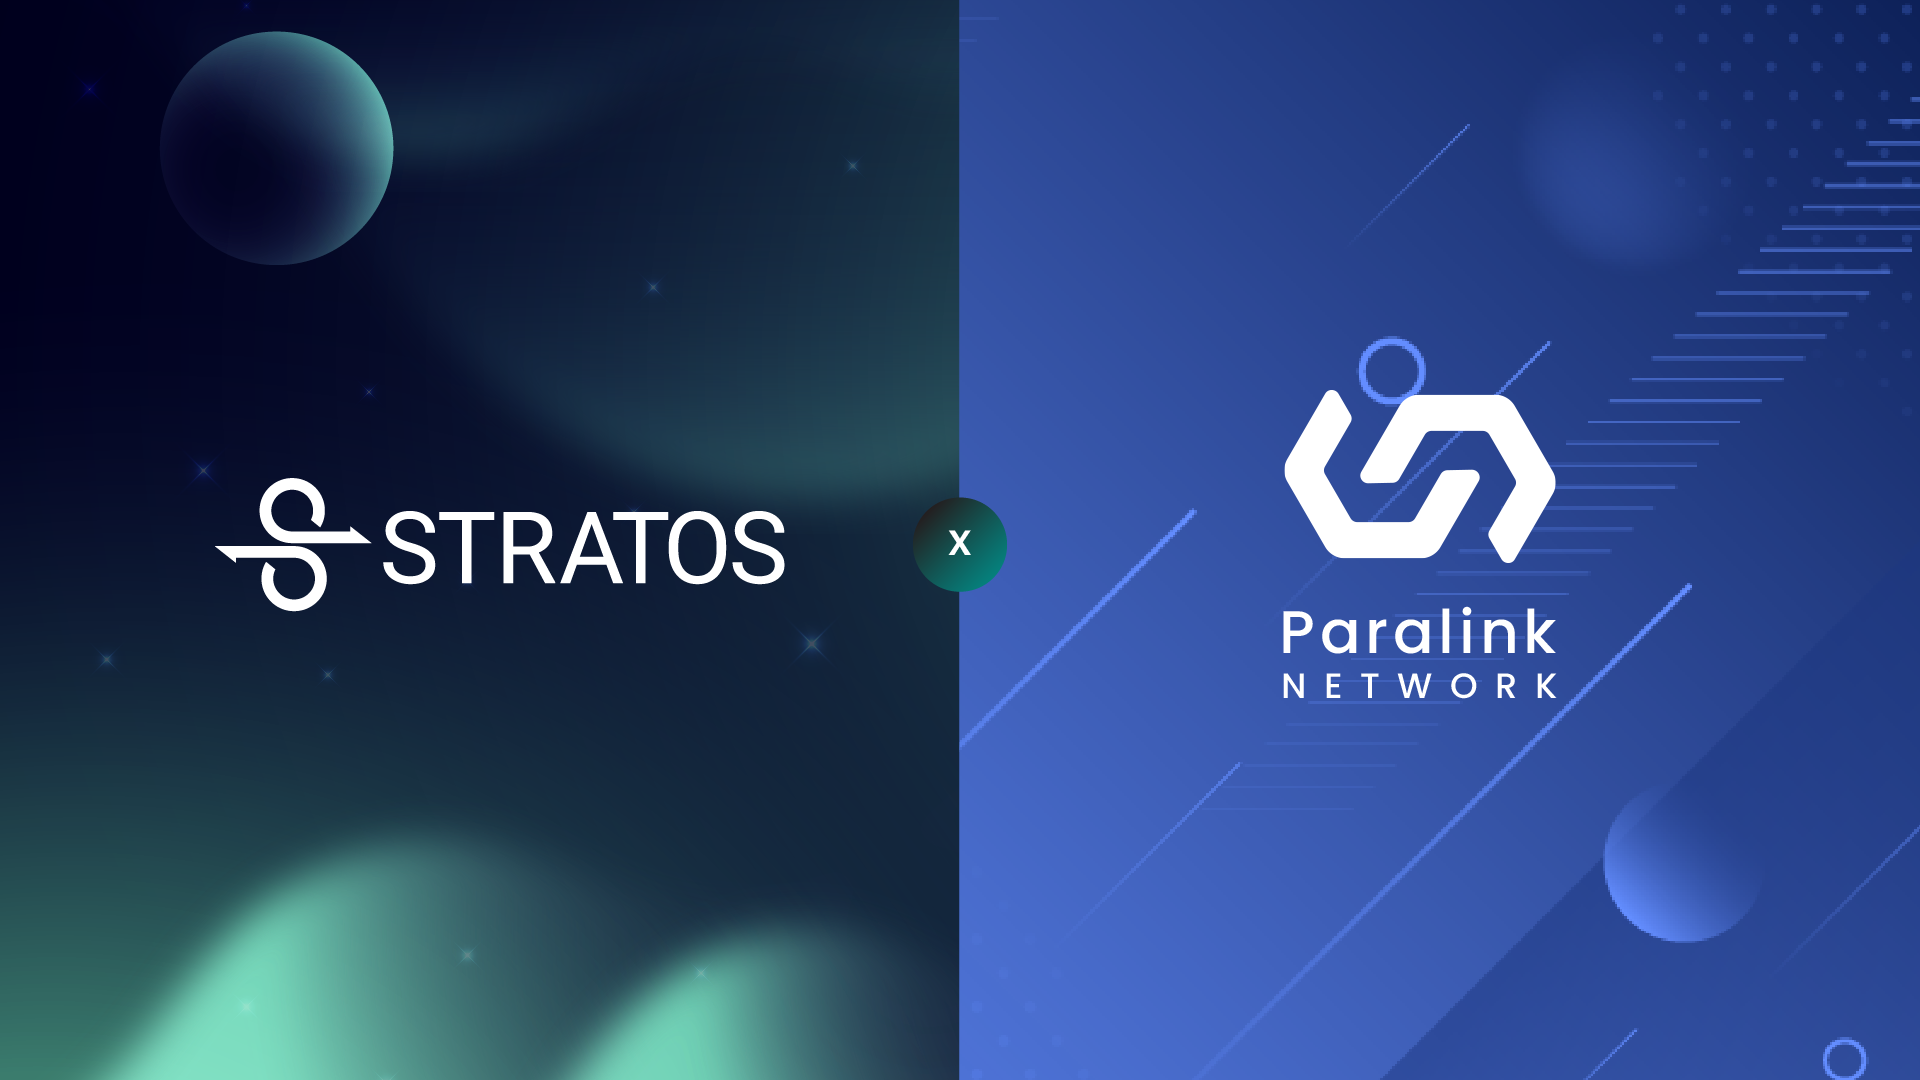 Paralink Network and Stratos announce the strategic partnership!